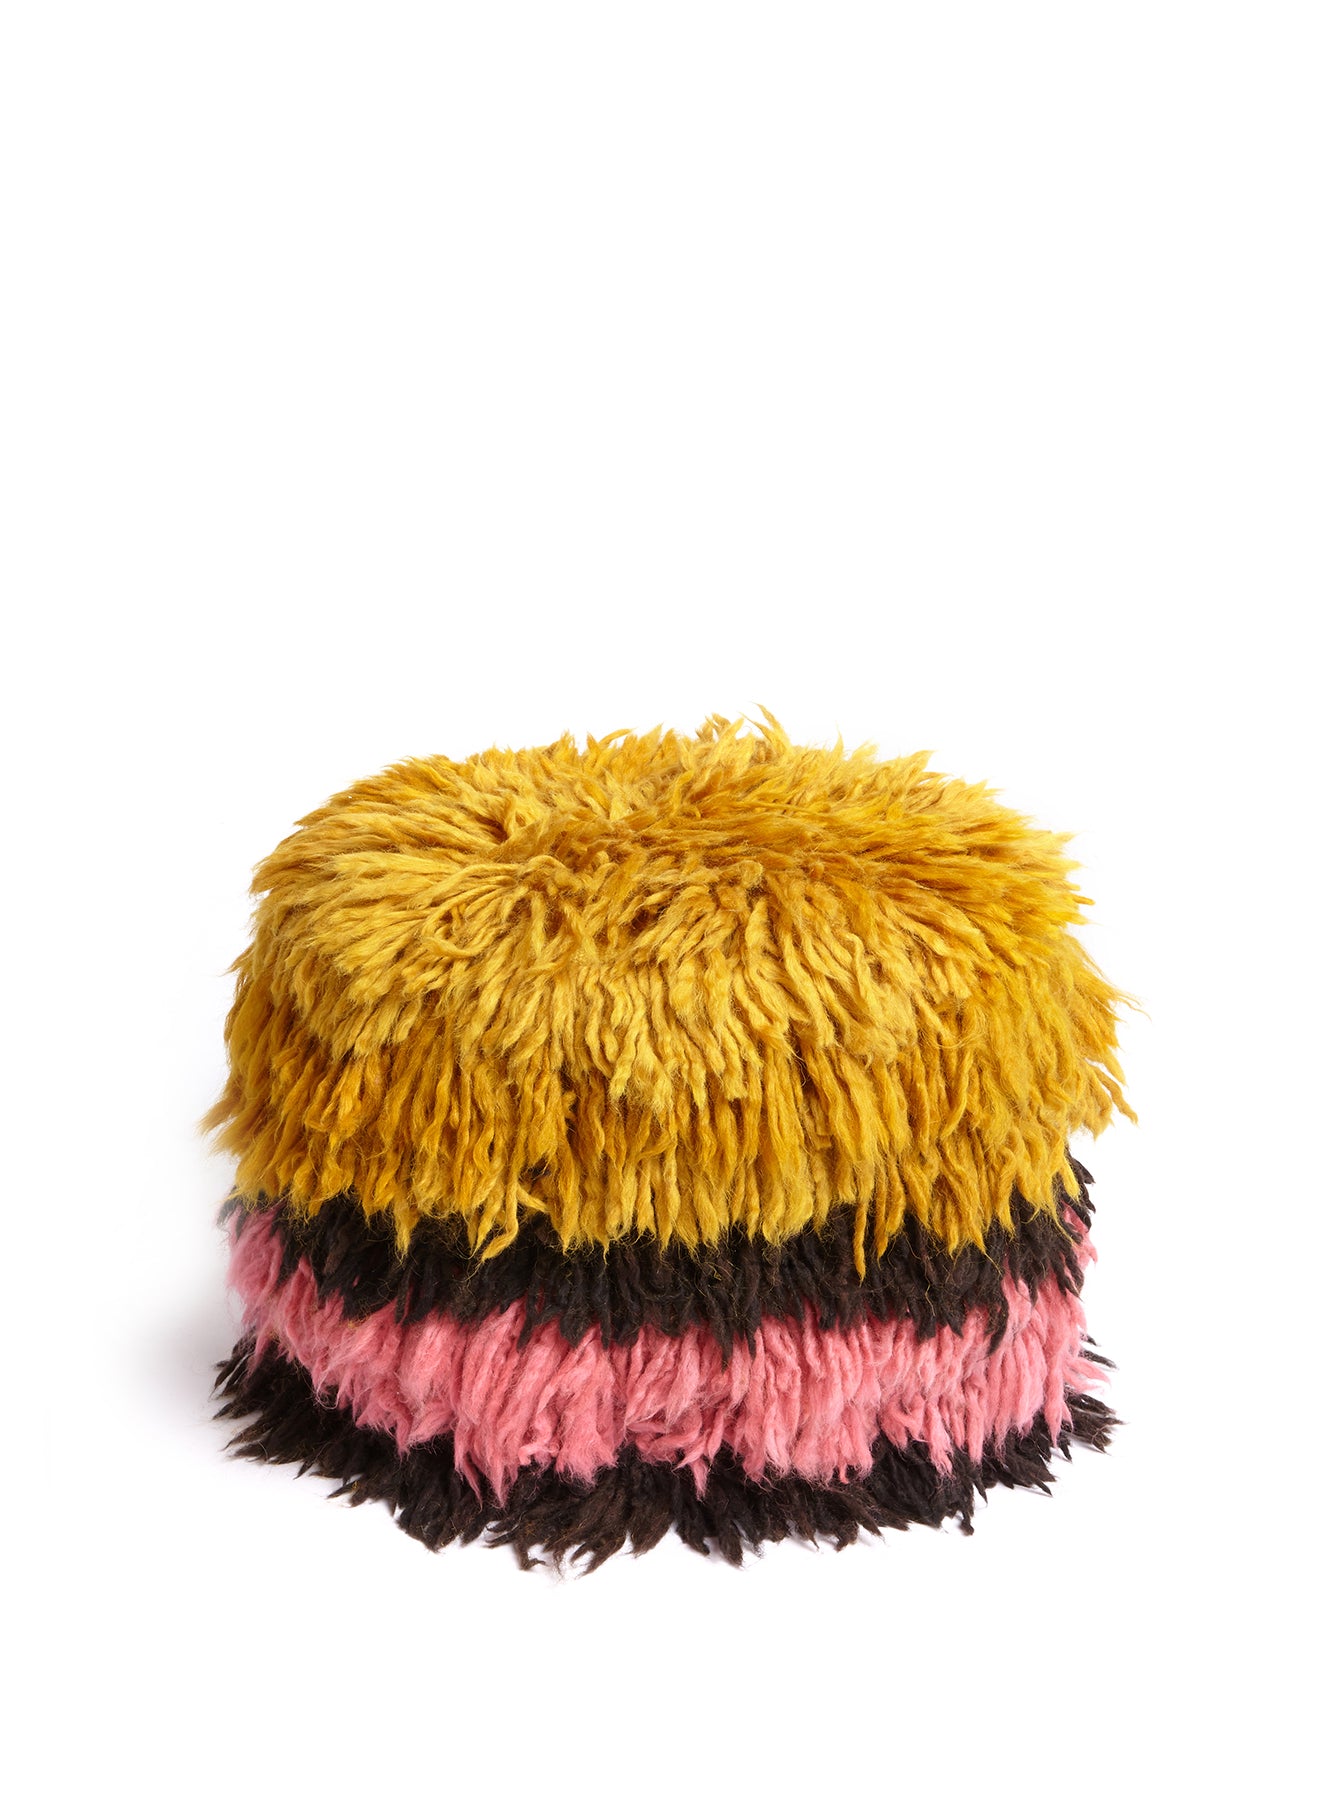 Super Shaggy Ottoman - Yellow and Pink